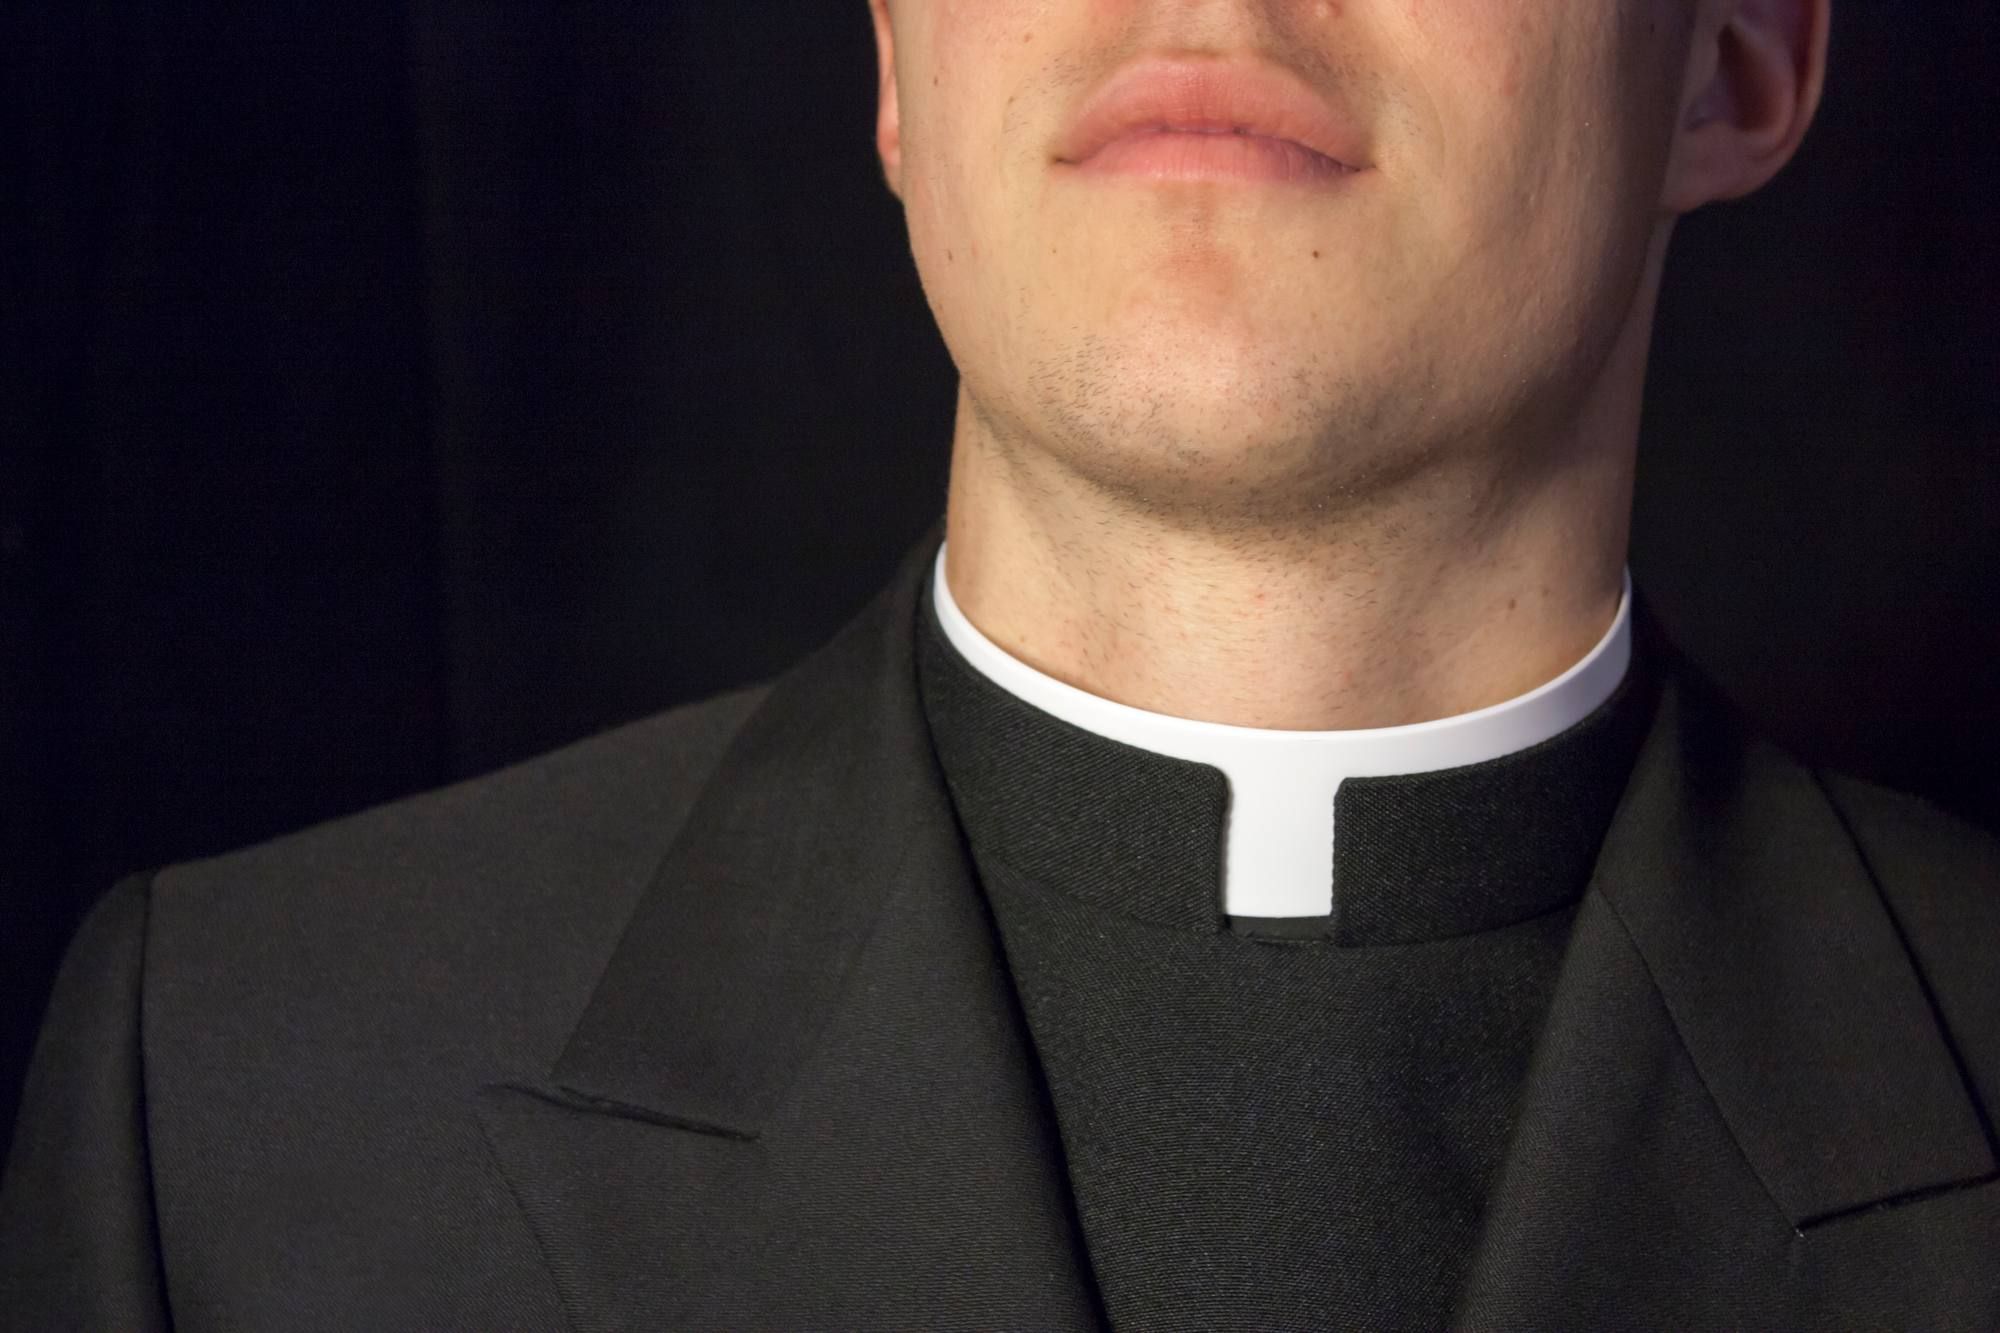 There are many Catholic priests accused of abuse